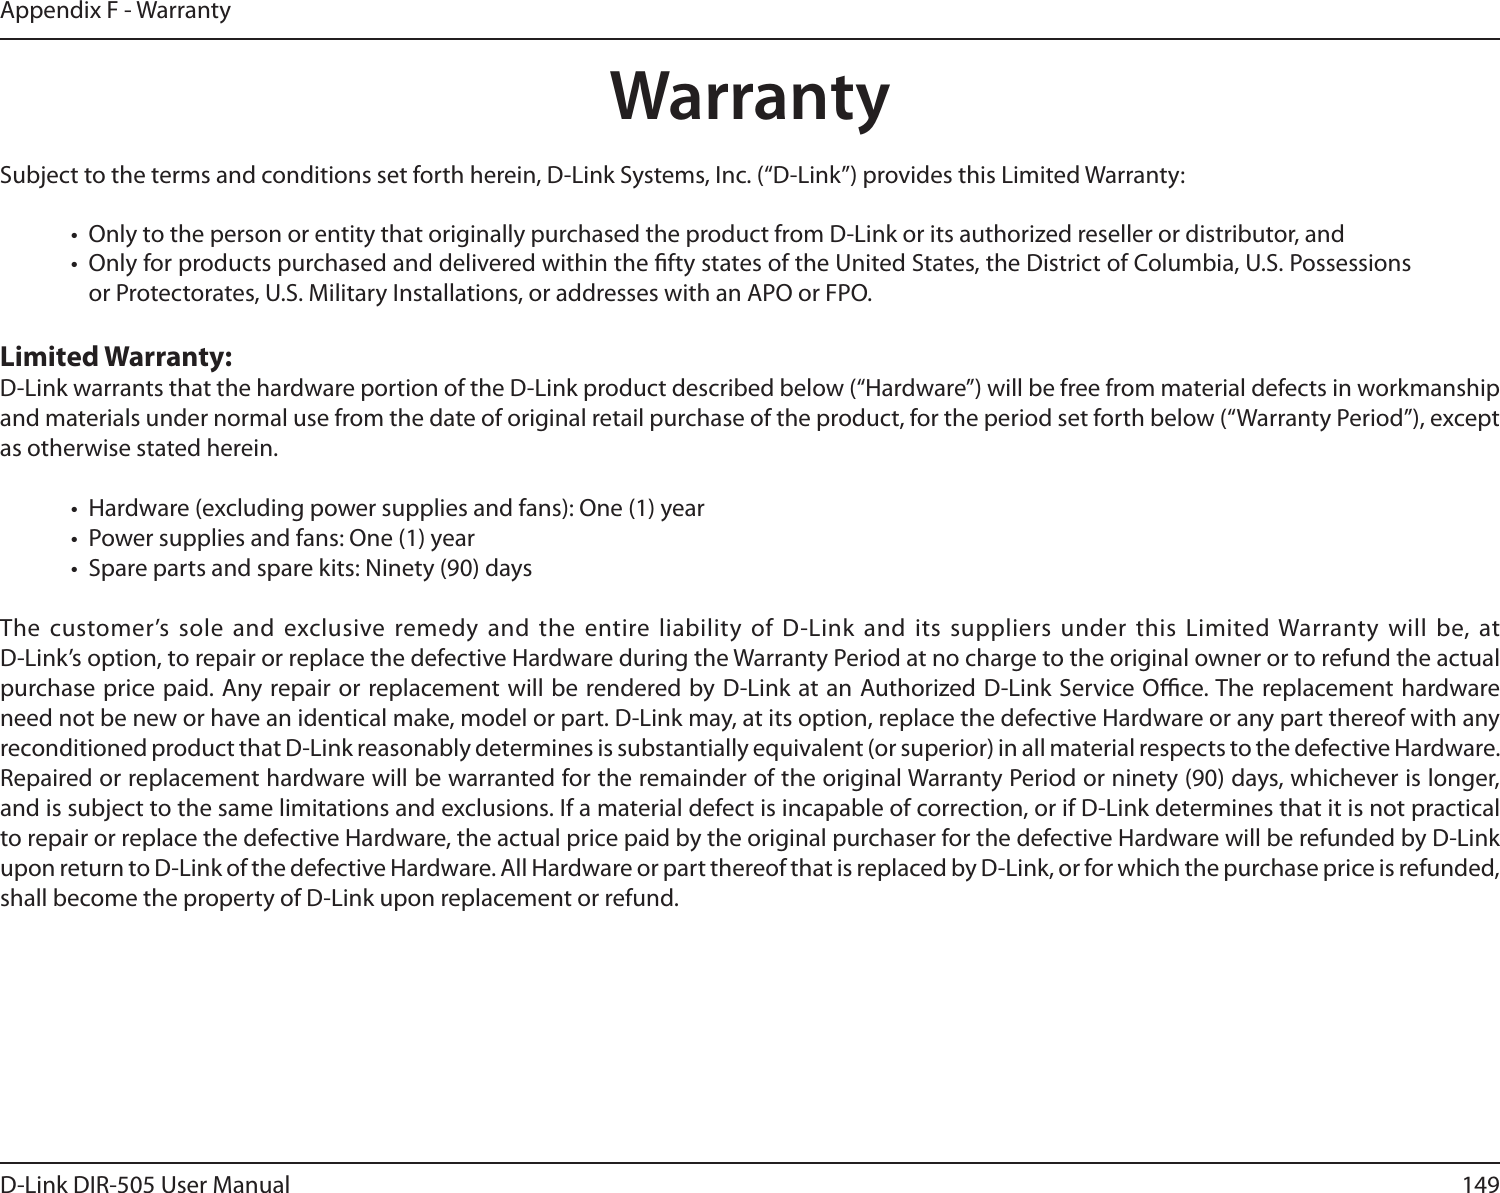 149D-Link DIR-505 User ManualAppendix F - WarrantyWarrantySubject to the terms and conditions set forth herein, D-Link Systems, Inc. (“D-Link”) provides this Limited Warranty:•  Only to the person or entity that originally purchased the product from D-Link or its authorized reseller or distributor, and•  Only for products purchased and delivered within the fty states of the United States, the District of Columbia, U.S. Possessions or Protectorates, U.S. Military Installations, or addresses with an APO or FPO.Limited Warranty:D-Link warrants that the hardware portion of the D-Link product described below (“Hardware”) will be free from material defects in workmanship and materials under normal use from the date of original retail purchase of the product, for the period set forth below (“Warranty Period”), except as otherwise stated herein.•  Hardware (excluding power supplies and fans): One (1) year•  Power supplies and fans: One (1) year•  Spare parts and spare kits: Ninety (90) daysThe customer’s sole  and exclusive remedy and  the entire liability of D-Link  and its  suppliers under this  Limited Warranty will  be, at  D-Link’s option, to repair or replace the defective Hardware during the Warranty Period at no charge to the original owner or to refund the actual purchase price paid. Any repair or replacement will be rendered by D-Link at an Authorized D-Link Service Oce. The replacement hardware need not be new or have an identical make, model or part. D-Link may, at its option, replace the defective Hardware or any part thereof with any reconditioned product that D-Link reasonably determines is substantially equivalent (or superior) in all material respects to the defective Hardware. Repaired or replacement hardware will be warranted for the remainder of the original Warranty Period or ninety (90) days, whichever is longer, and is subject to the same limitations and exclusions. If a material defect is incapable of correction, or if D-Link determines that it is not practical to repair or replace the defective Hardware, the actual price paid by the original purchaser for the defective Hardware will be refunded by D-Link upon return to D-Link of the defective Hardware. All Hardware or part thereof that is replaced by D-Link, or for which the purchase price is refunded, shall become the property of D-Link upon replacement or refund.